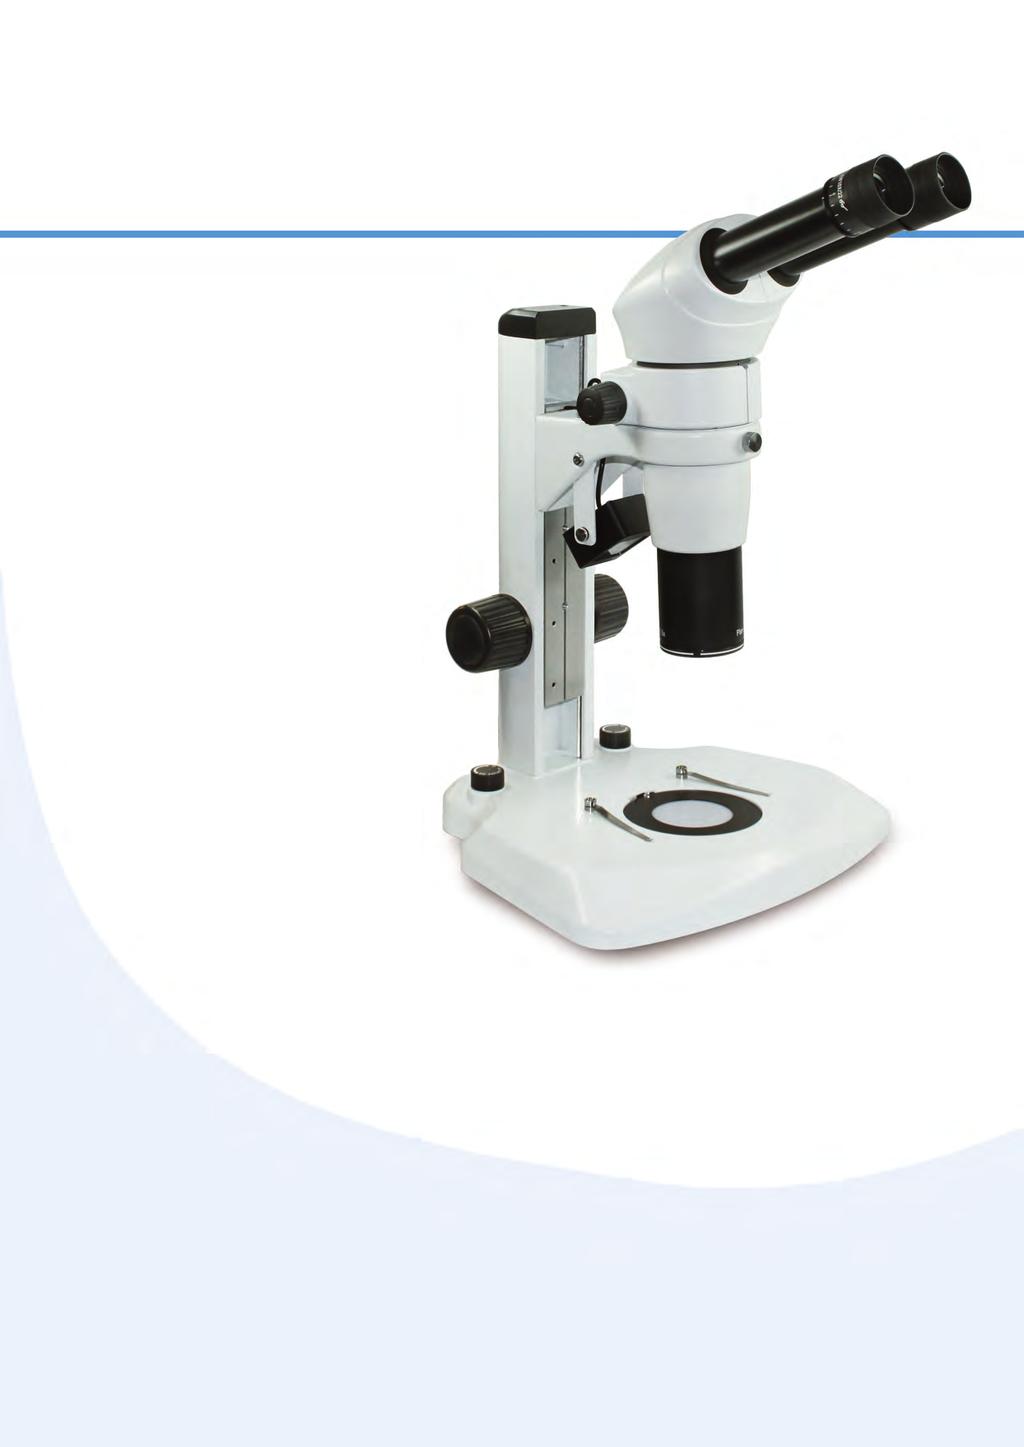 Optech Stereomicroscopes GZ 808 Series Stereomicroscope with Greenough optical system, for complete routine & research lab analysis.